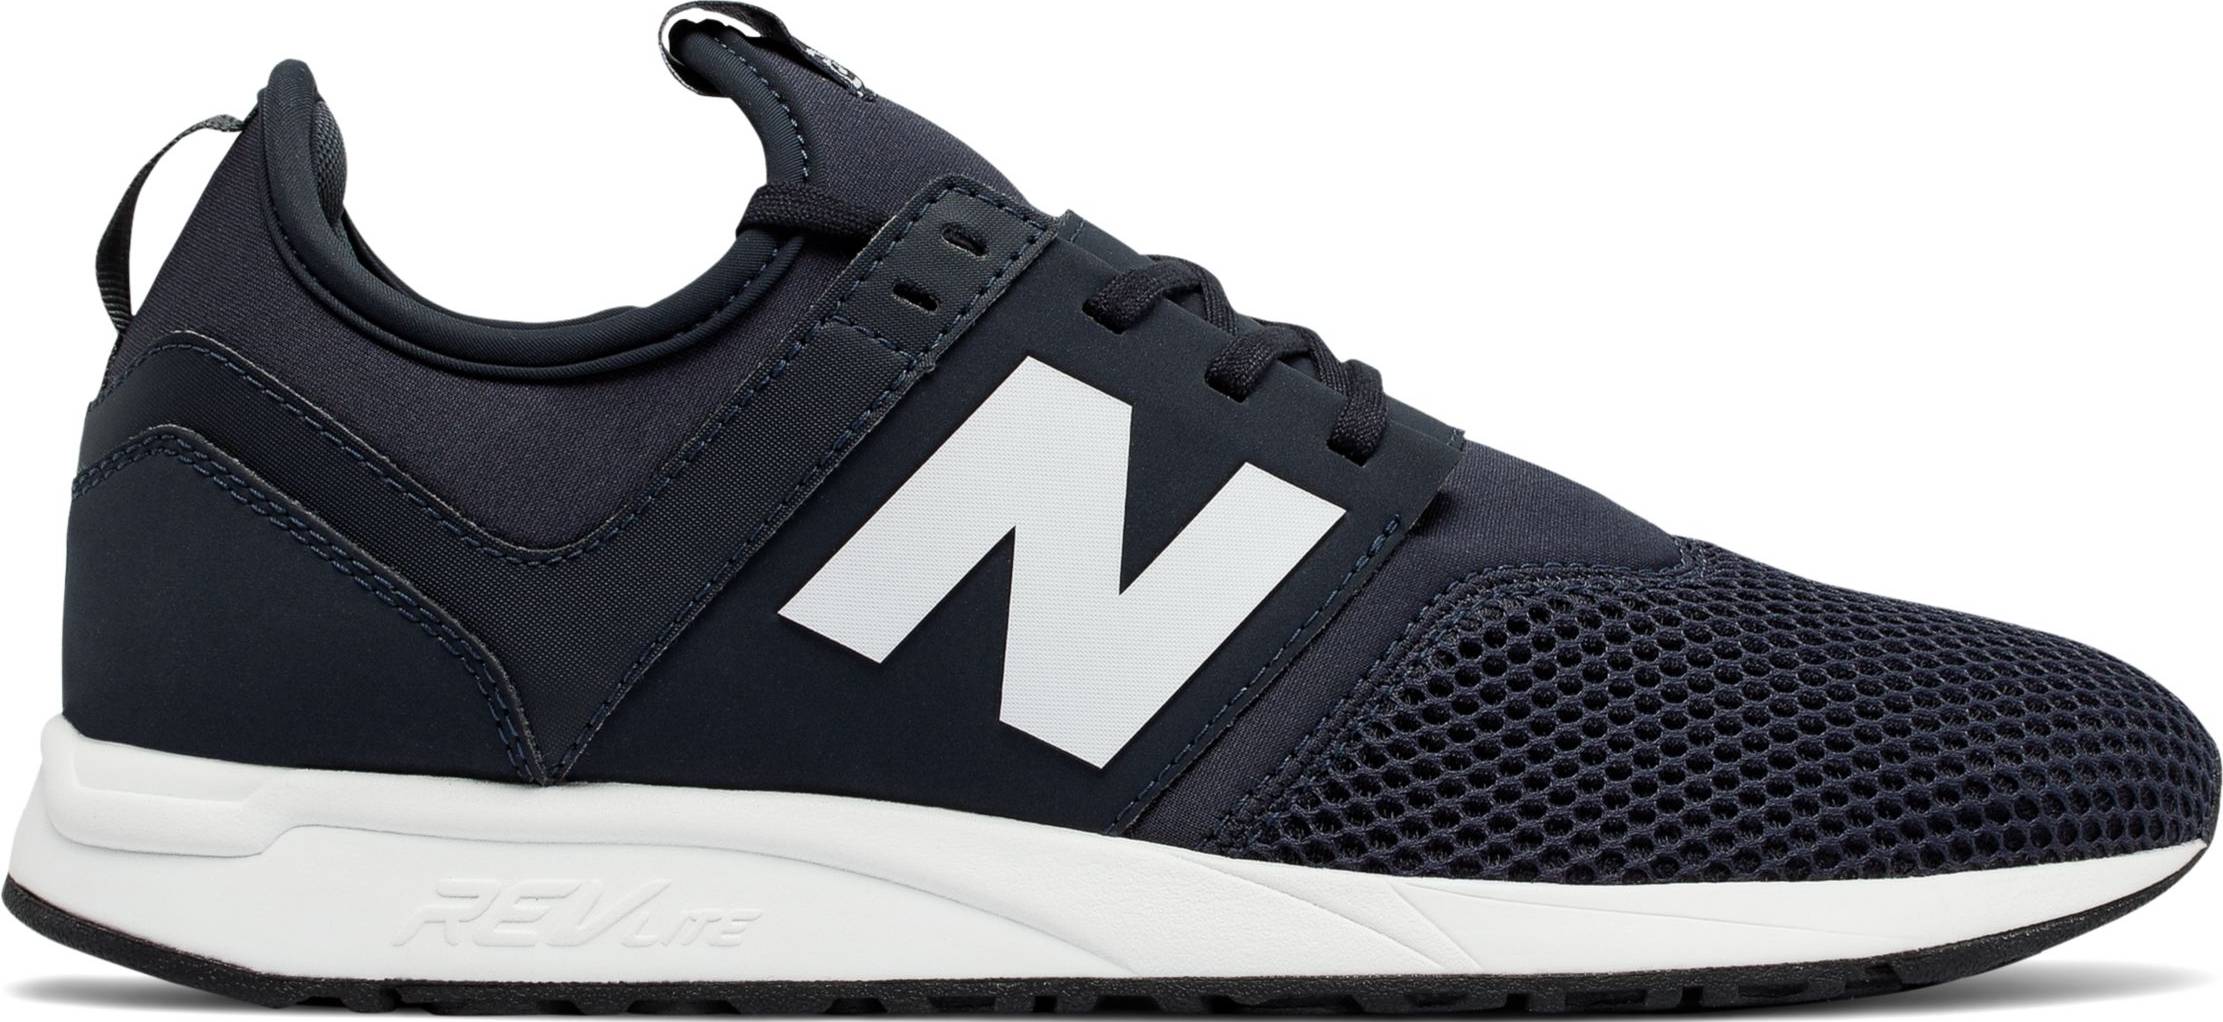 New Balance 247 Classic Review, Facts, Comparison | Runrepeat